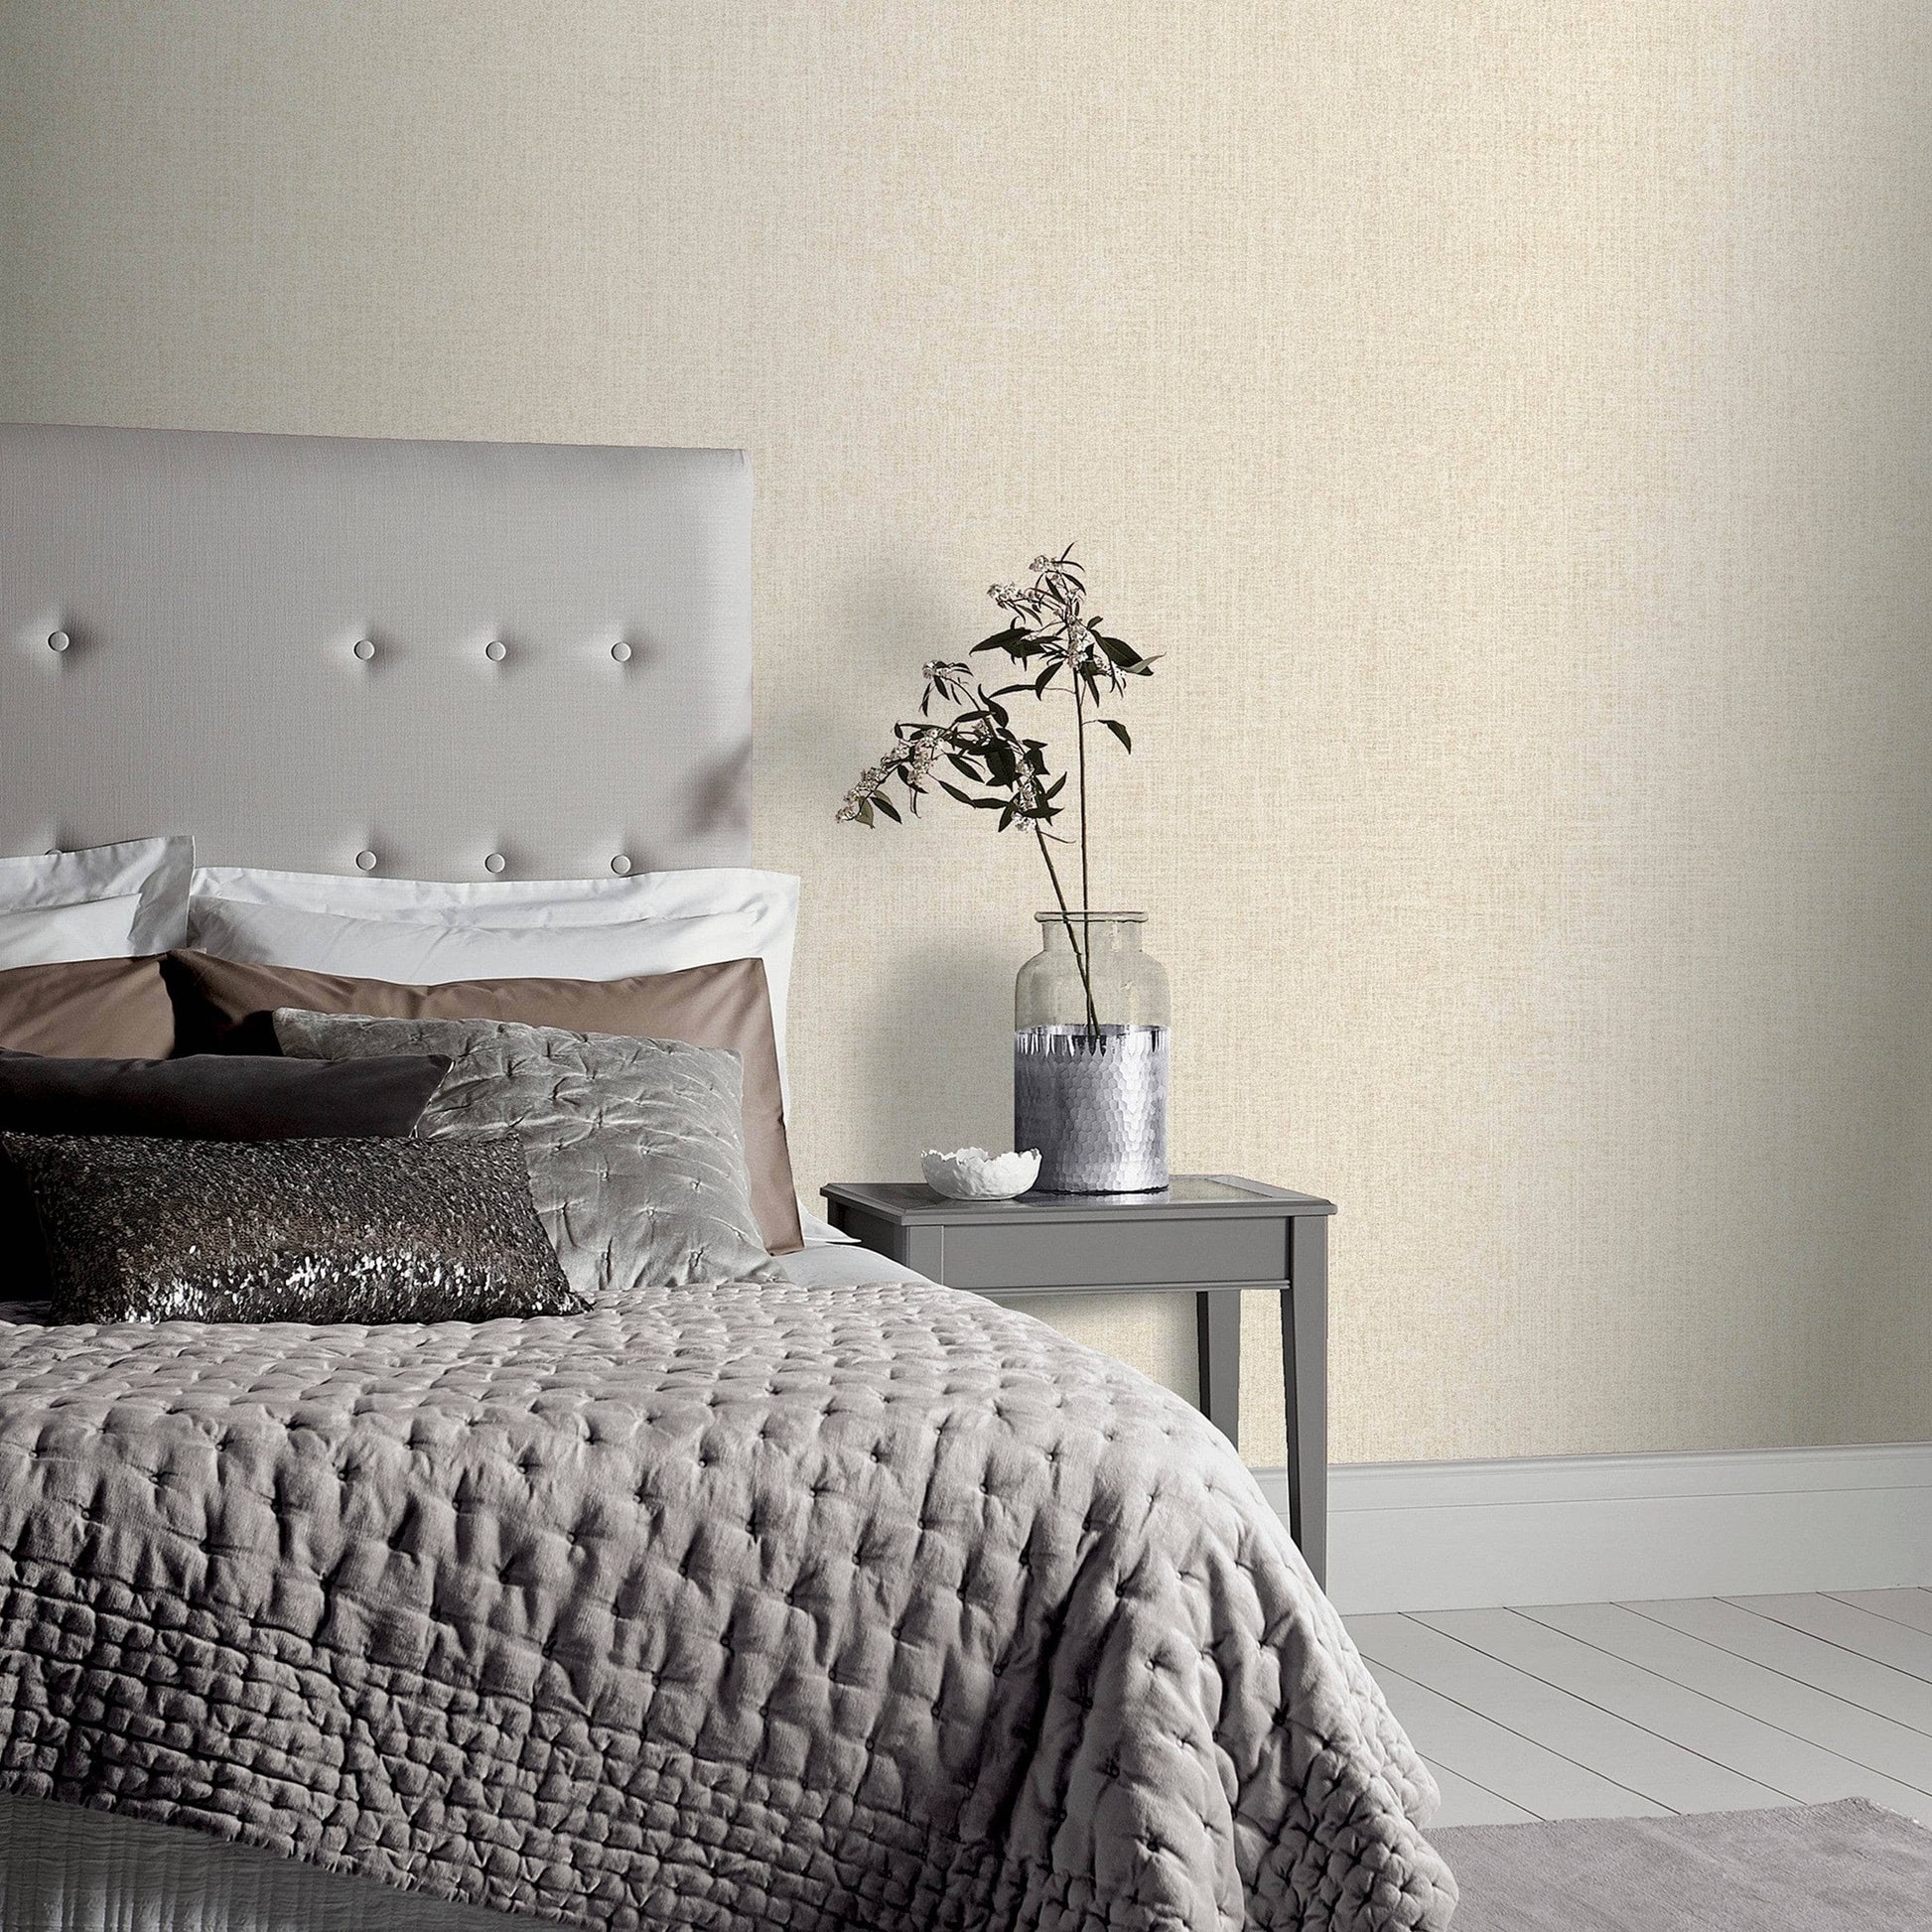 Wallpaper  -  Arthouse Luxe Hessian Taupe Wallpaper - 295402  -  60009444